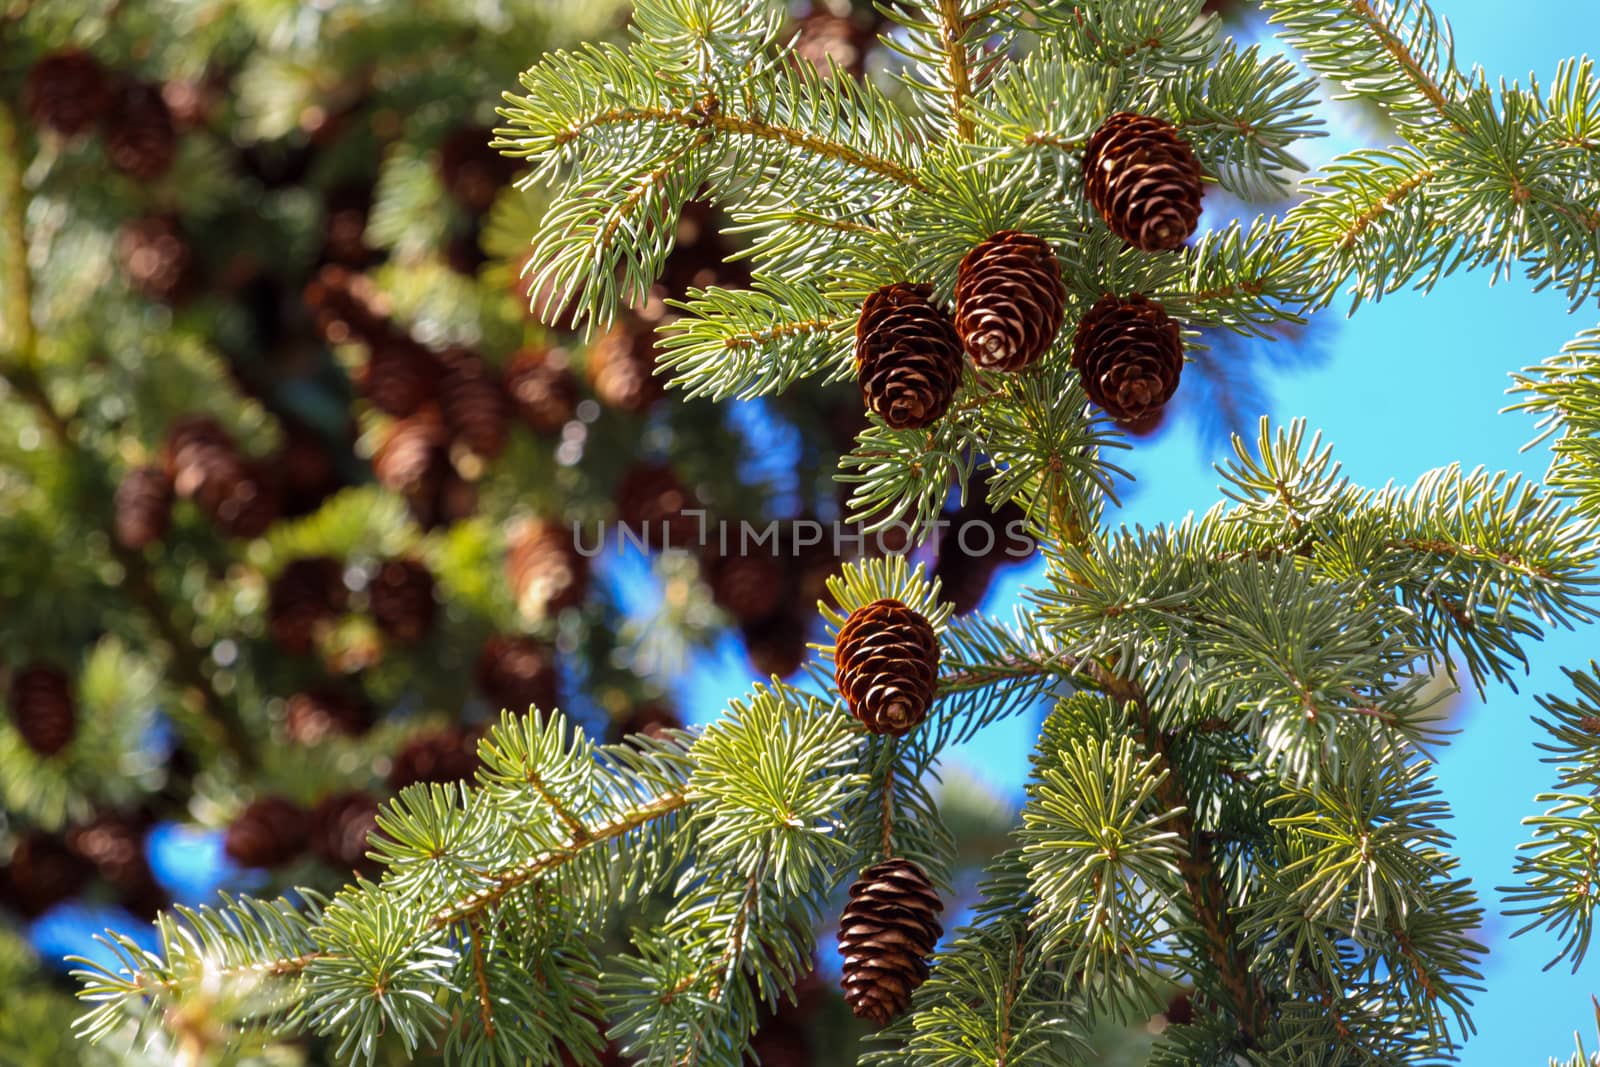 The branches, needles and cones of a spruce tree, an evergreen conifer in the pine family, are seen close up in bright, vibrant detail.